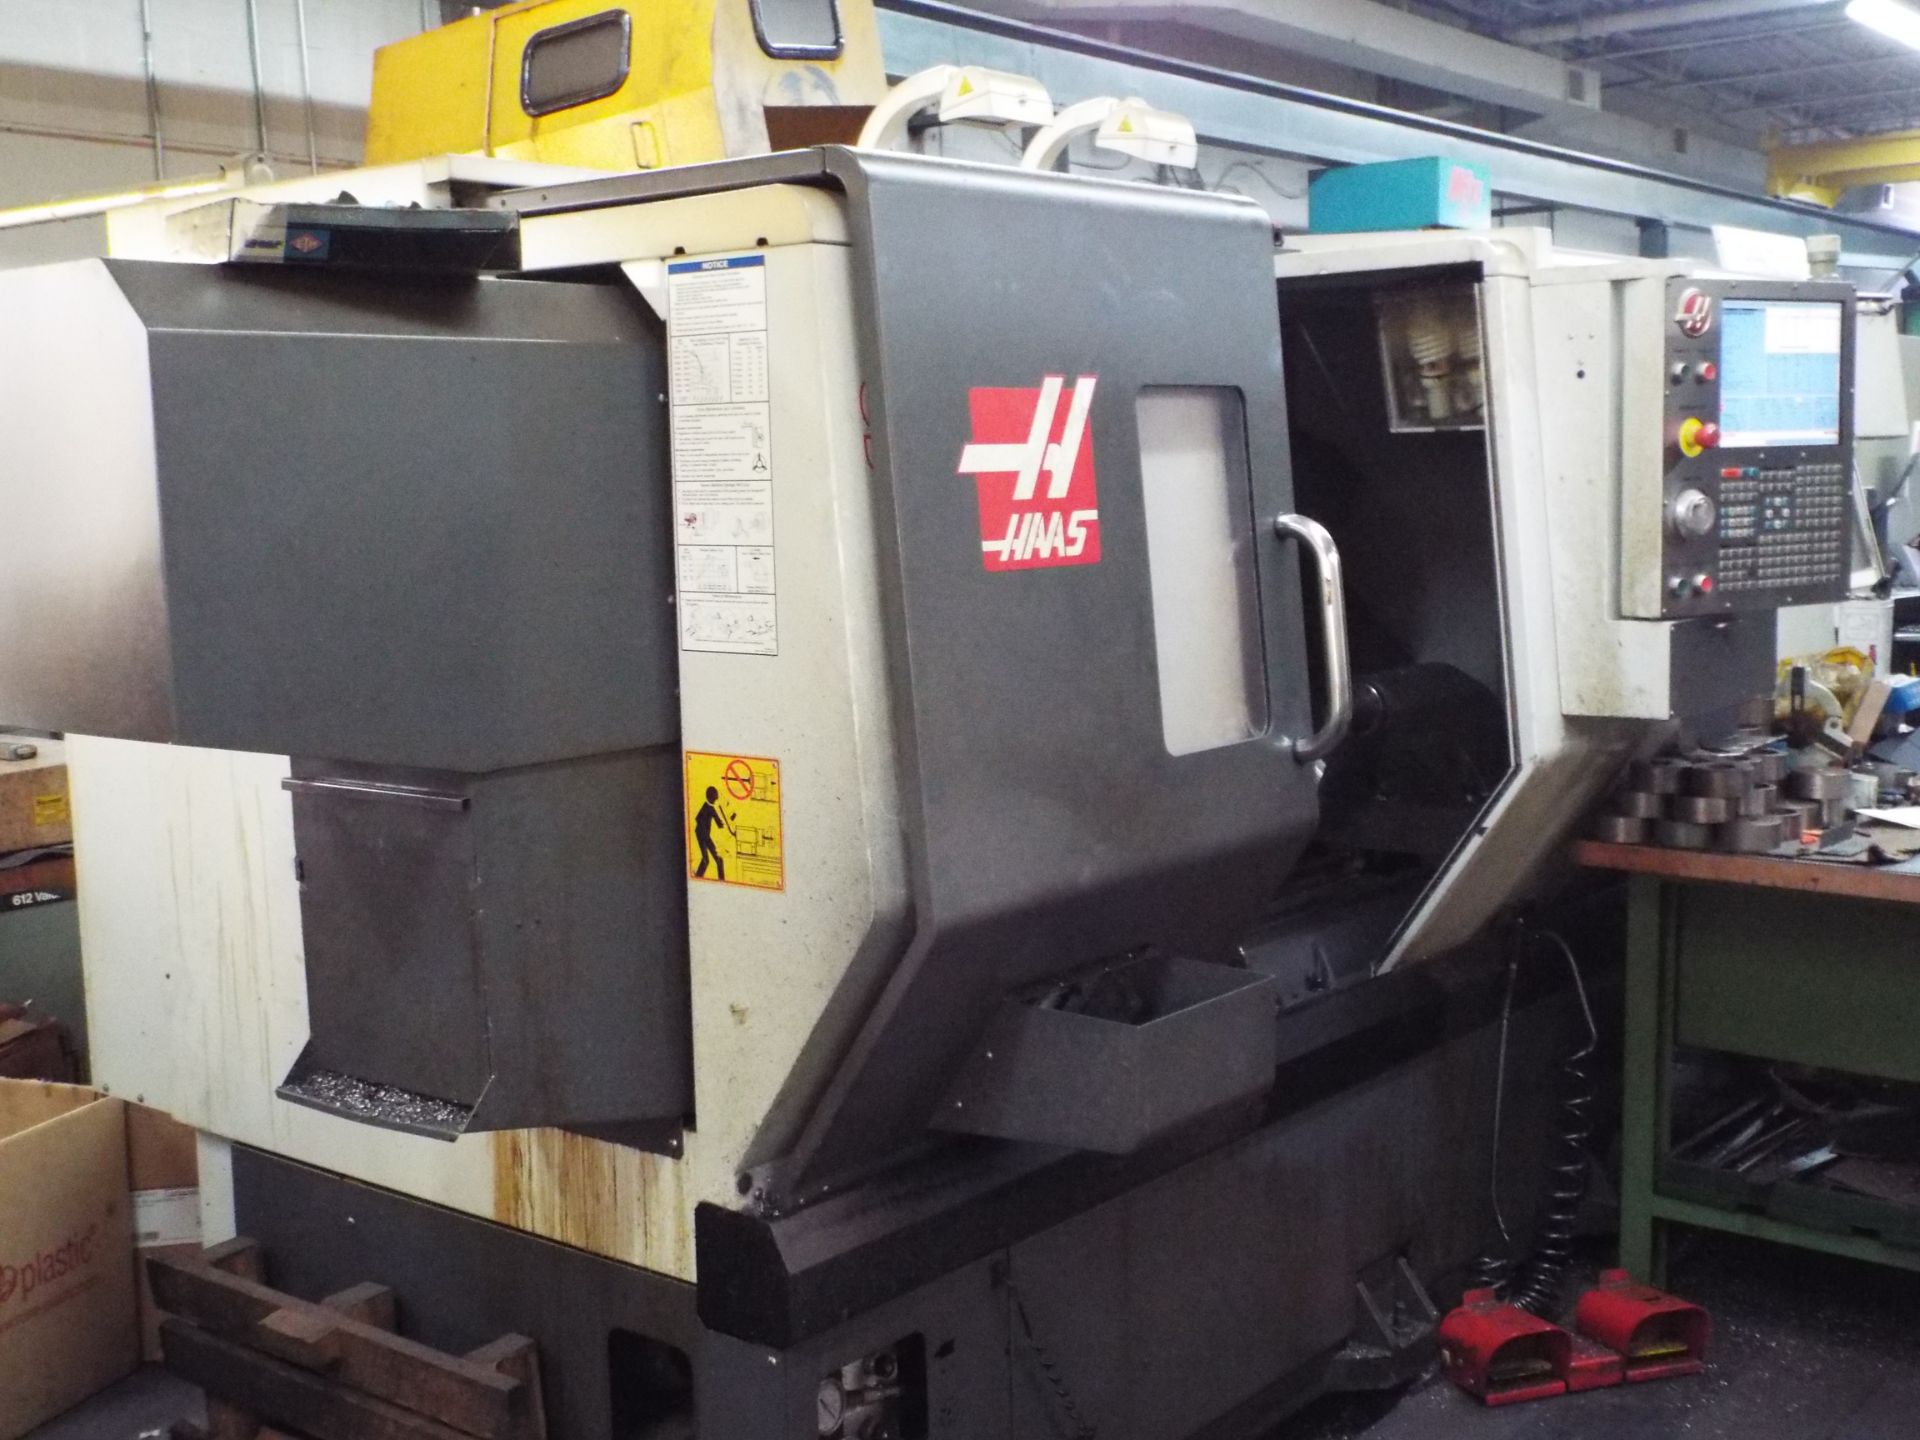 HAAS (2012) ST-30 CNC TURNING CENTER WITH HAAS CNC CONTROL, 12" 3 JAW CHUCK, 31" SWING OVER BED, 21"